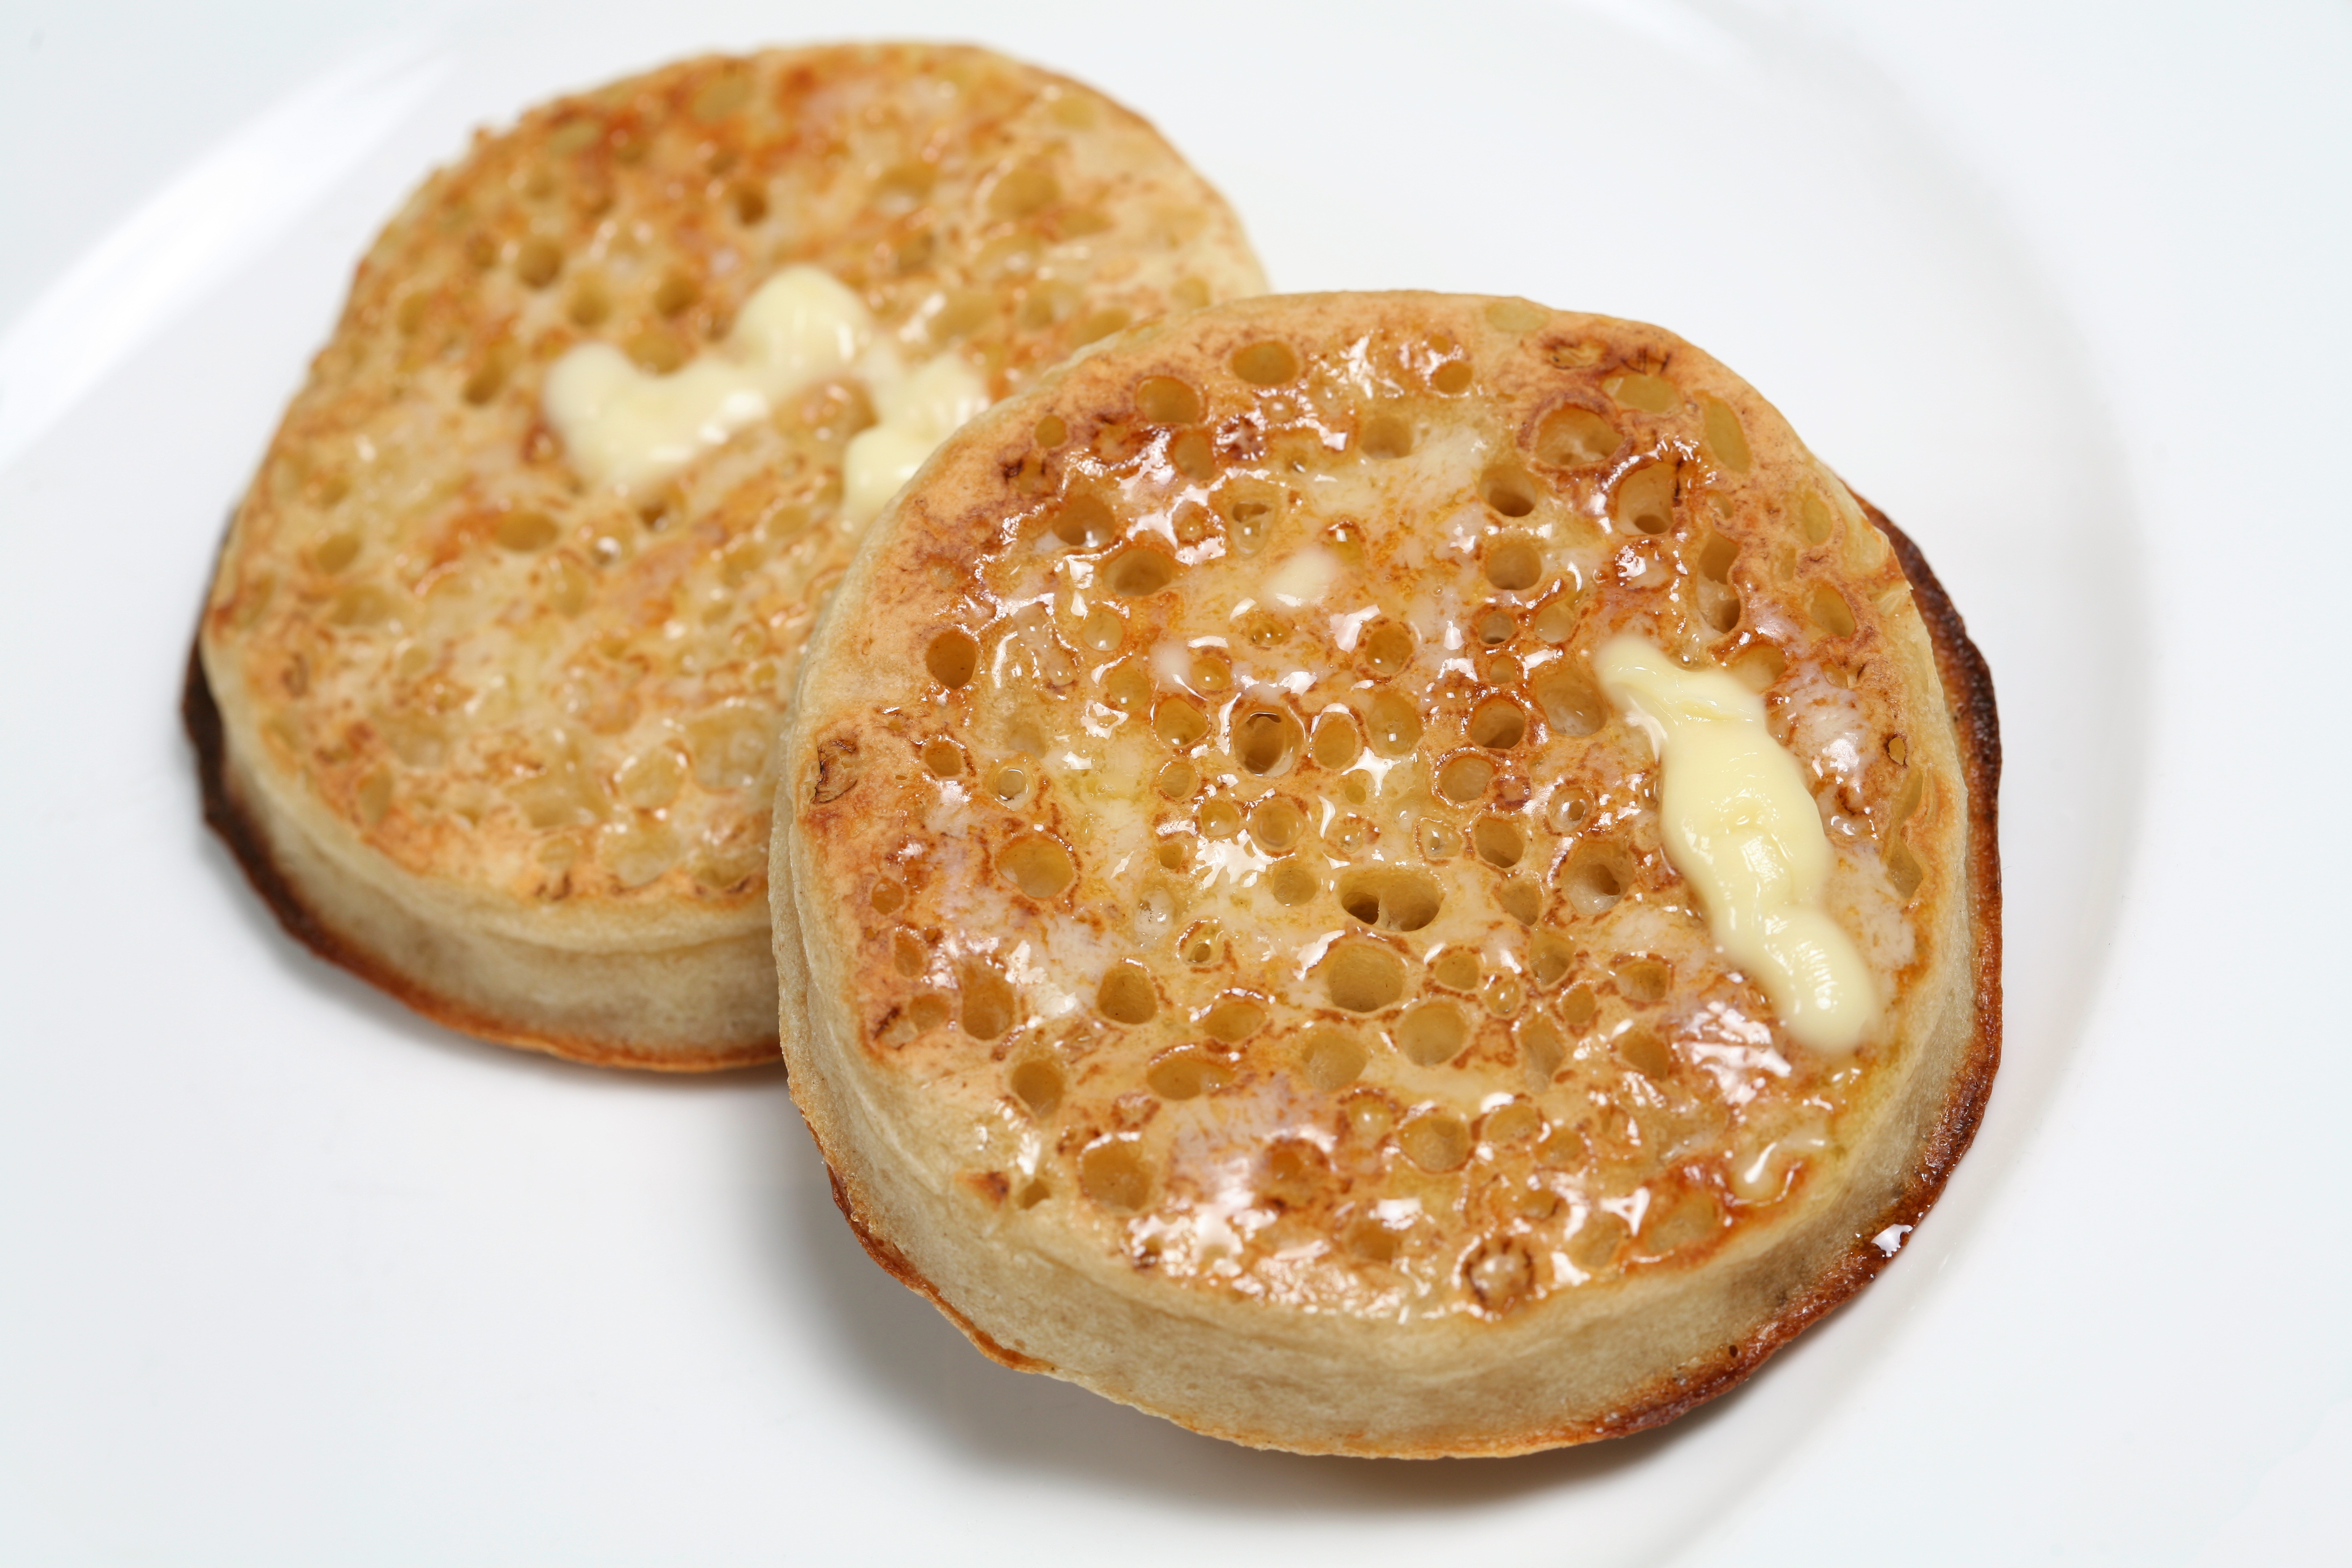 A Europe-wide shortage of carbon dioxide has caused shortages of crumpets and beer in the United Kingdom. (JoeGough—Getty Images/iStockphoto)